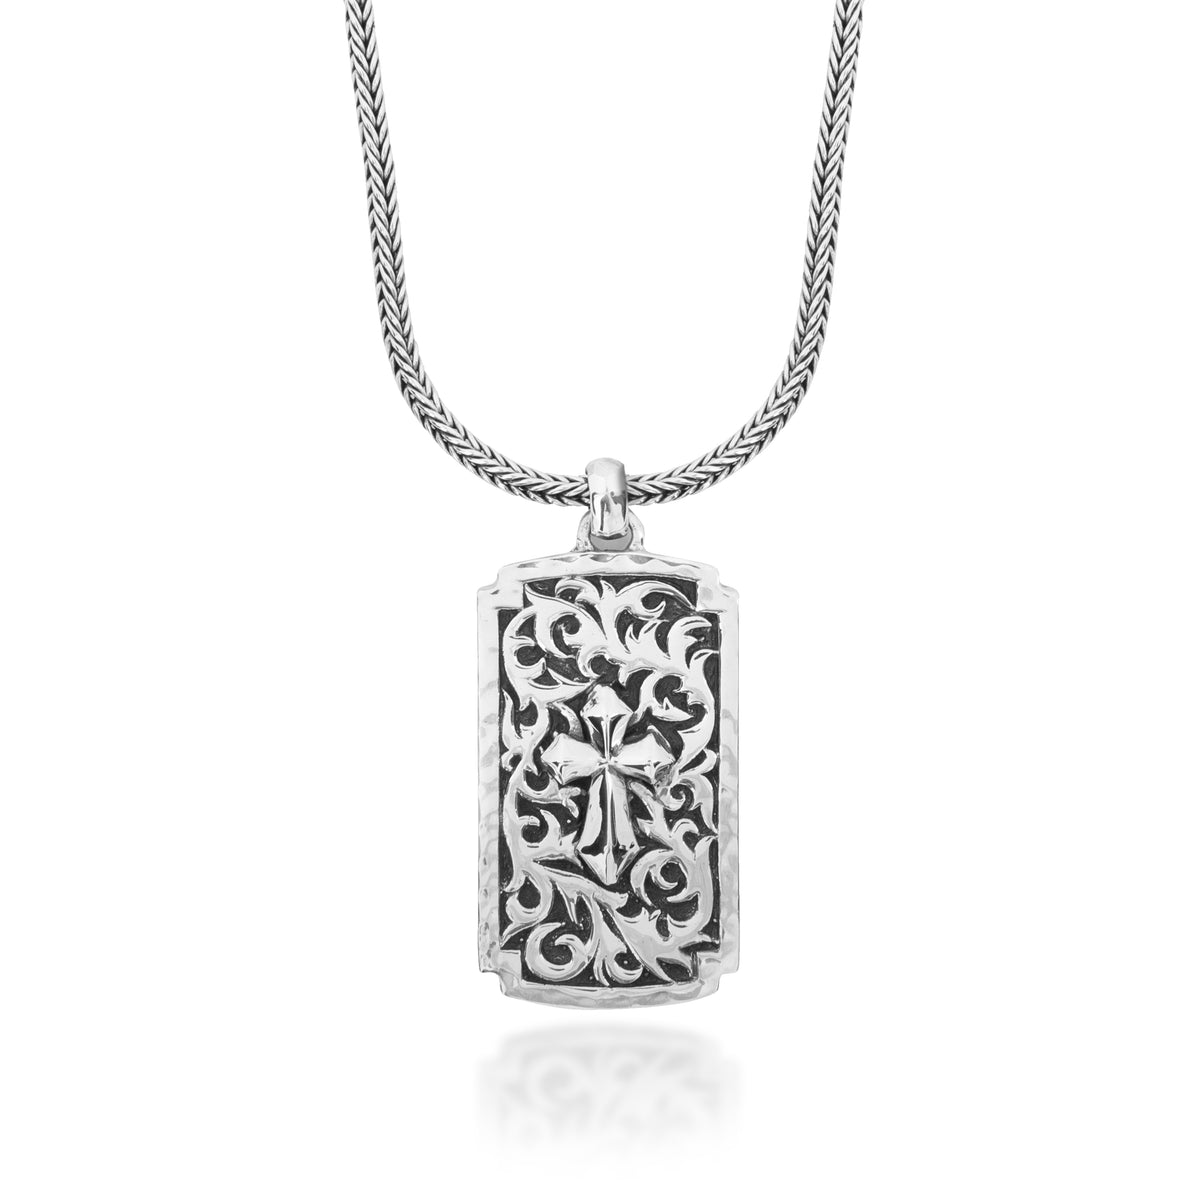 Classic LH Tribal Scroll ID Tag with Cross Light Middle Pendant Necklace. 36mm x 21mm Pendant